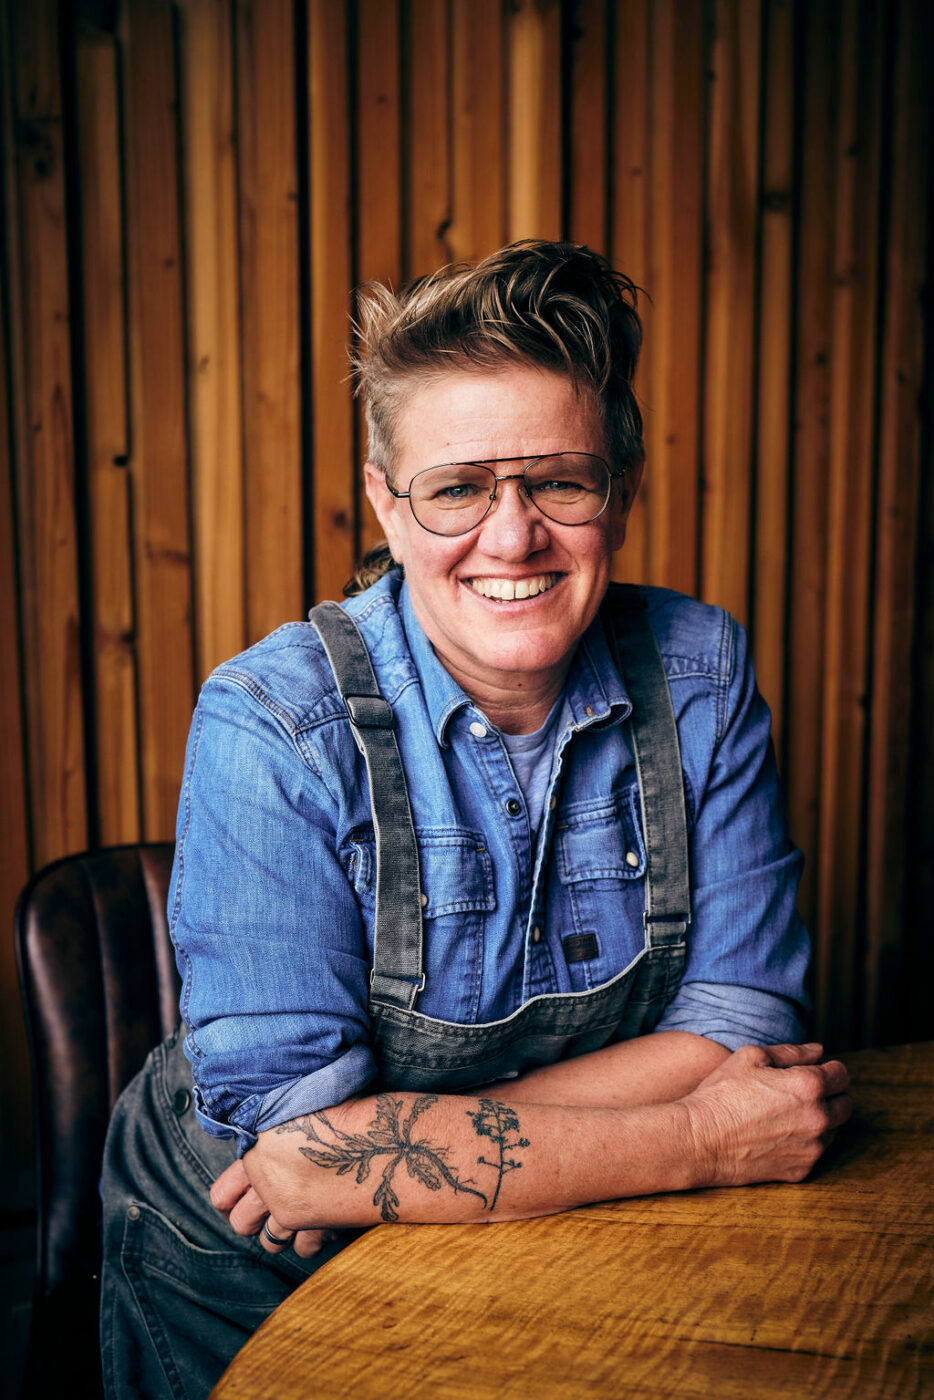 Crista Luedtke is opening Road Trip restaurant in Guerneville. (Kelly Puleio Photography)